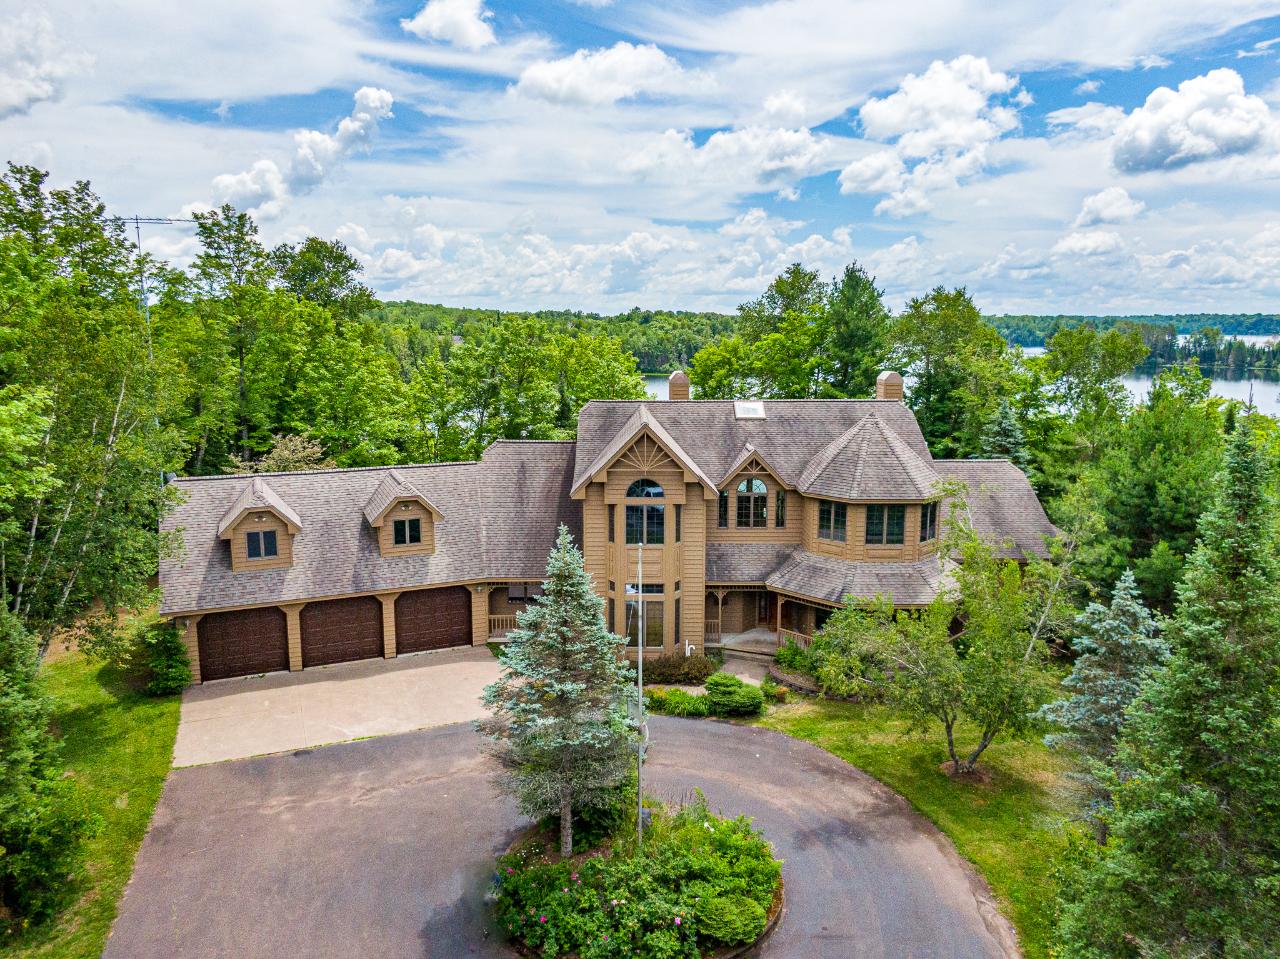 REDUCED! Harris Lake Luxury Estate on 2.24 acres w/211' of sand frontage! Completely updated including painting inside and out, new flooring, new fixtures, new furnace and much more. Great AirBnB opportunity with over $130K in bookings! The grand entrance leads to the great room w/ 28' high ceiling & massive Lannon stone FP. Chef's kitchen features a double oven Viking range, Sub-Zero refrigerator, wine cooler, cabinetry of the highest quality & much more! The master suite includes a 2-way FP, huge bath, WIC, Jacuzzi tub, separate shower & large vanity. Full bath, luxurious wet bar room/den, 1st floor laundry, formal dining room, large BR & much more round out the main floor. Upstairs, there's 4 more BRs & 2 full baths. Breathtaking water and woods views from every room! Massive lower level is beautifully finished as a huge family/rec room with W/O to patio area. Spacious 3-car att garage w/huge bonus room above for extra sleeping! Truly a MUST SEE for discriminating buyers!